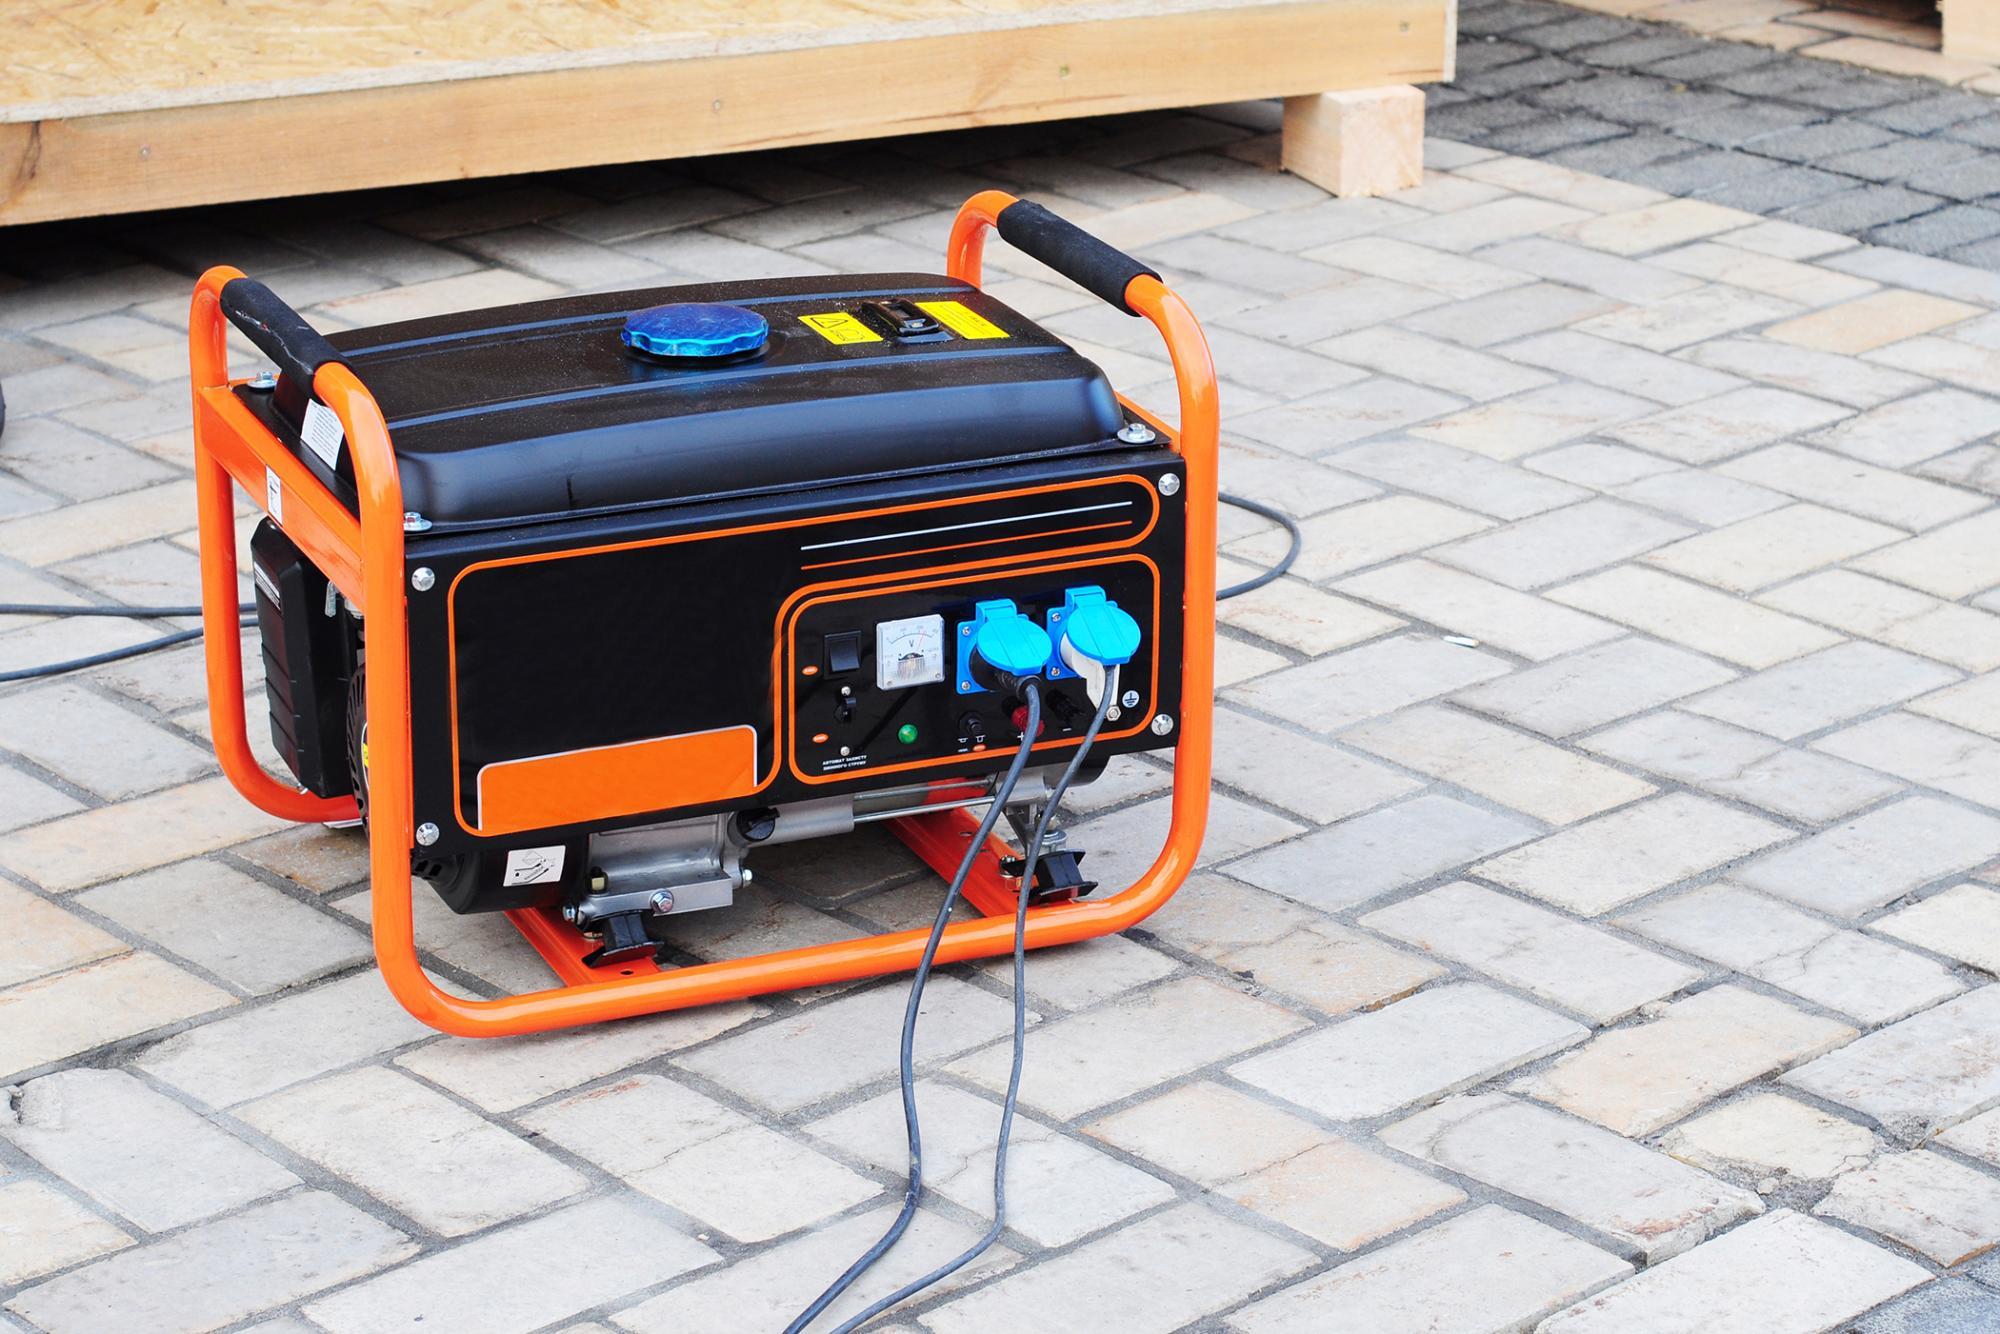 Portable generator sitting outside on cobblestone with cords plugged into it